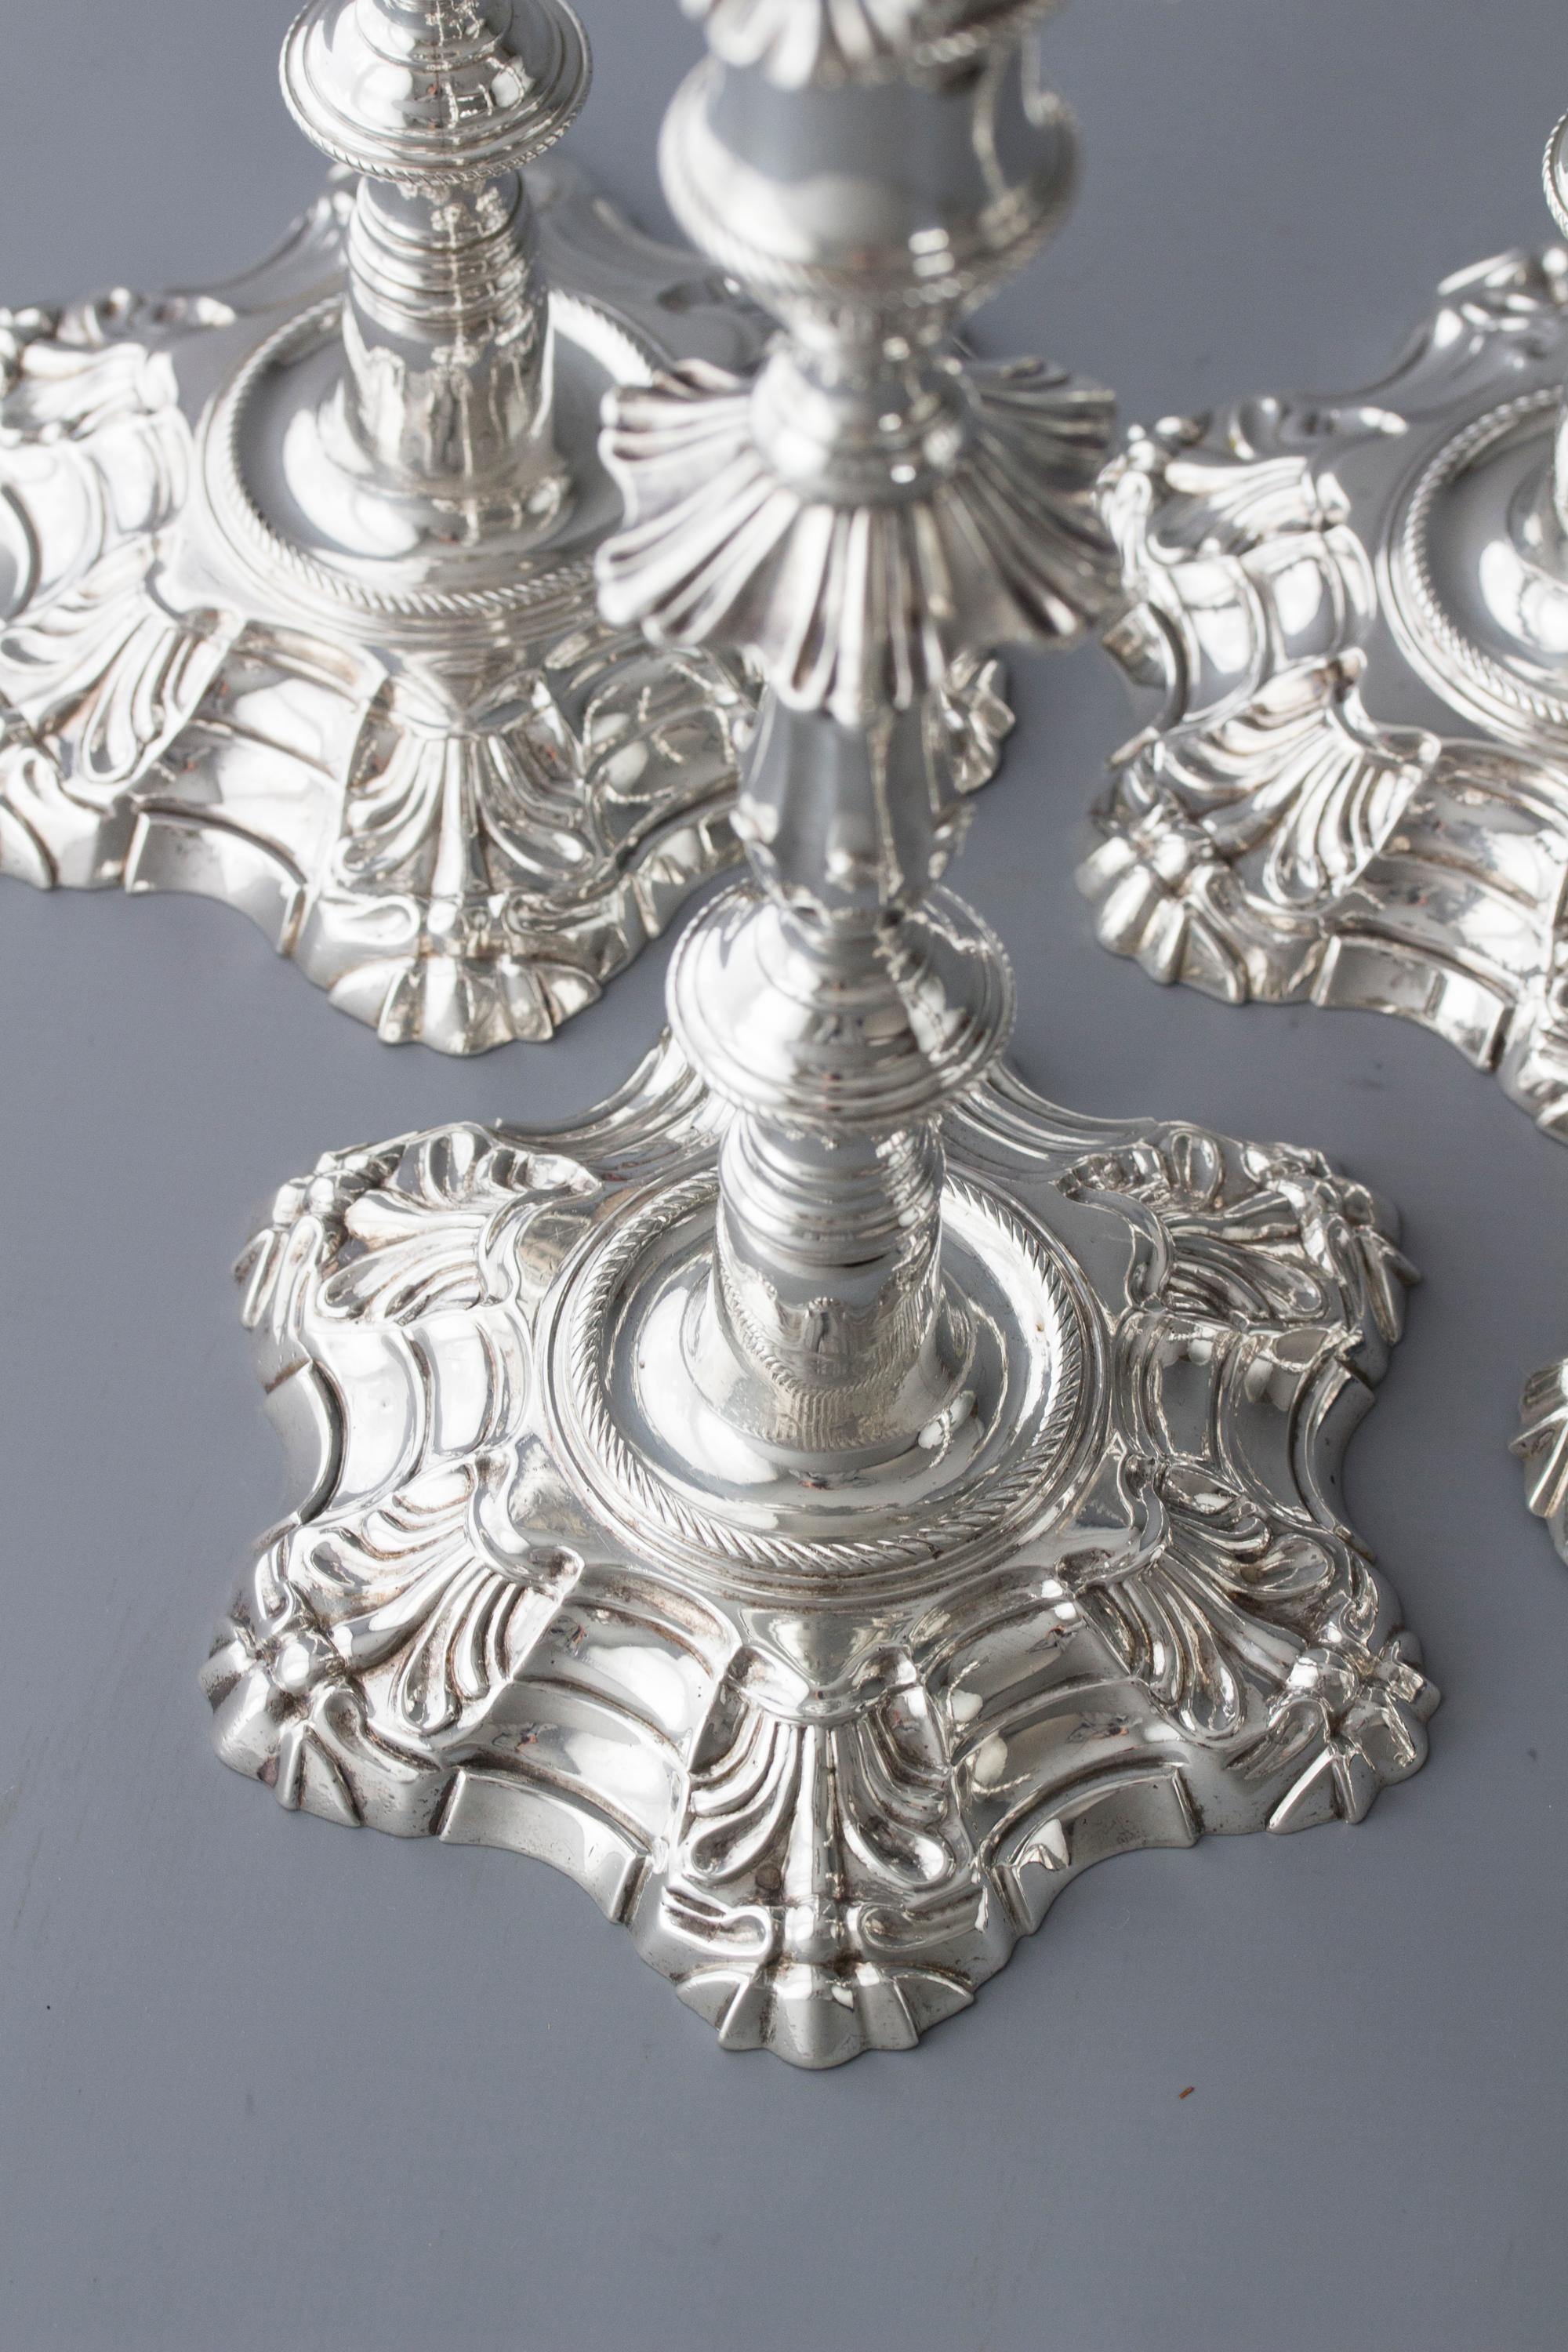 Exceptional Set of Four Silver Candlesticks London 1757 by William Cafe 2